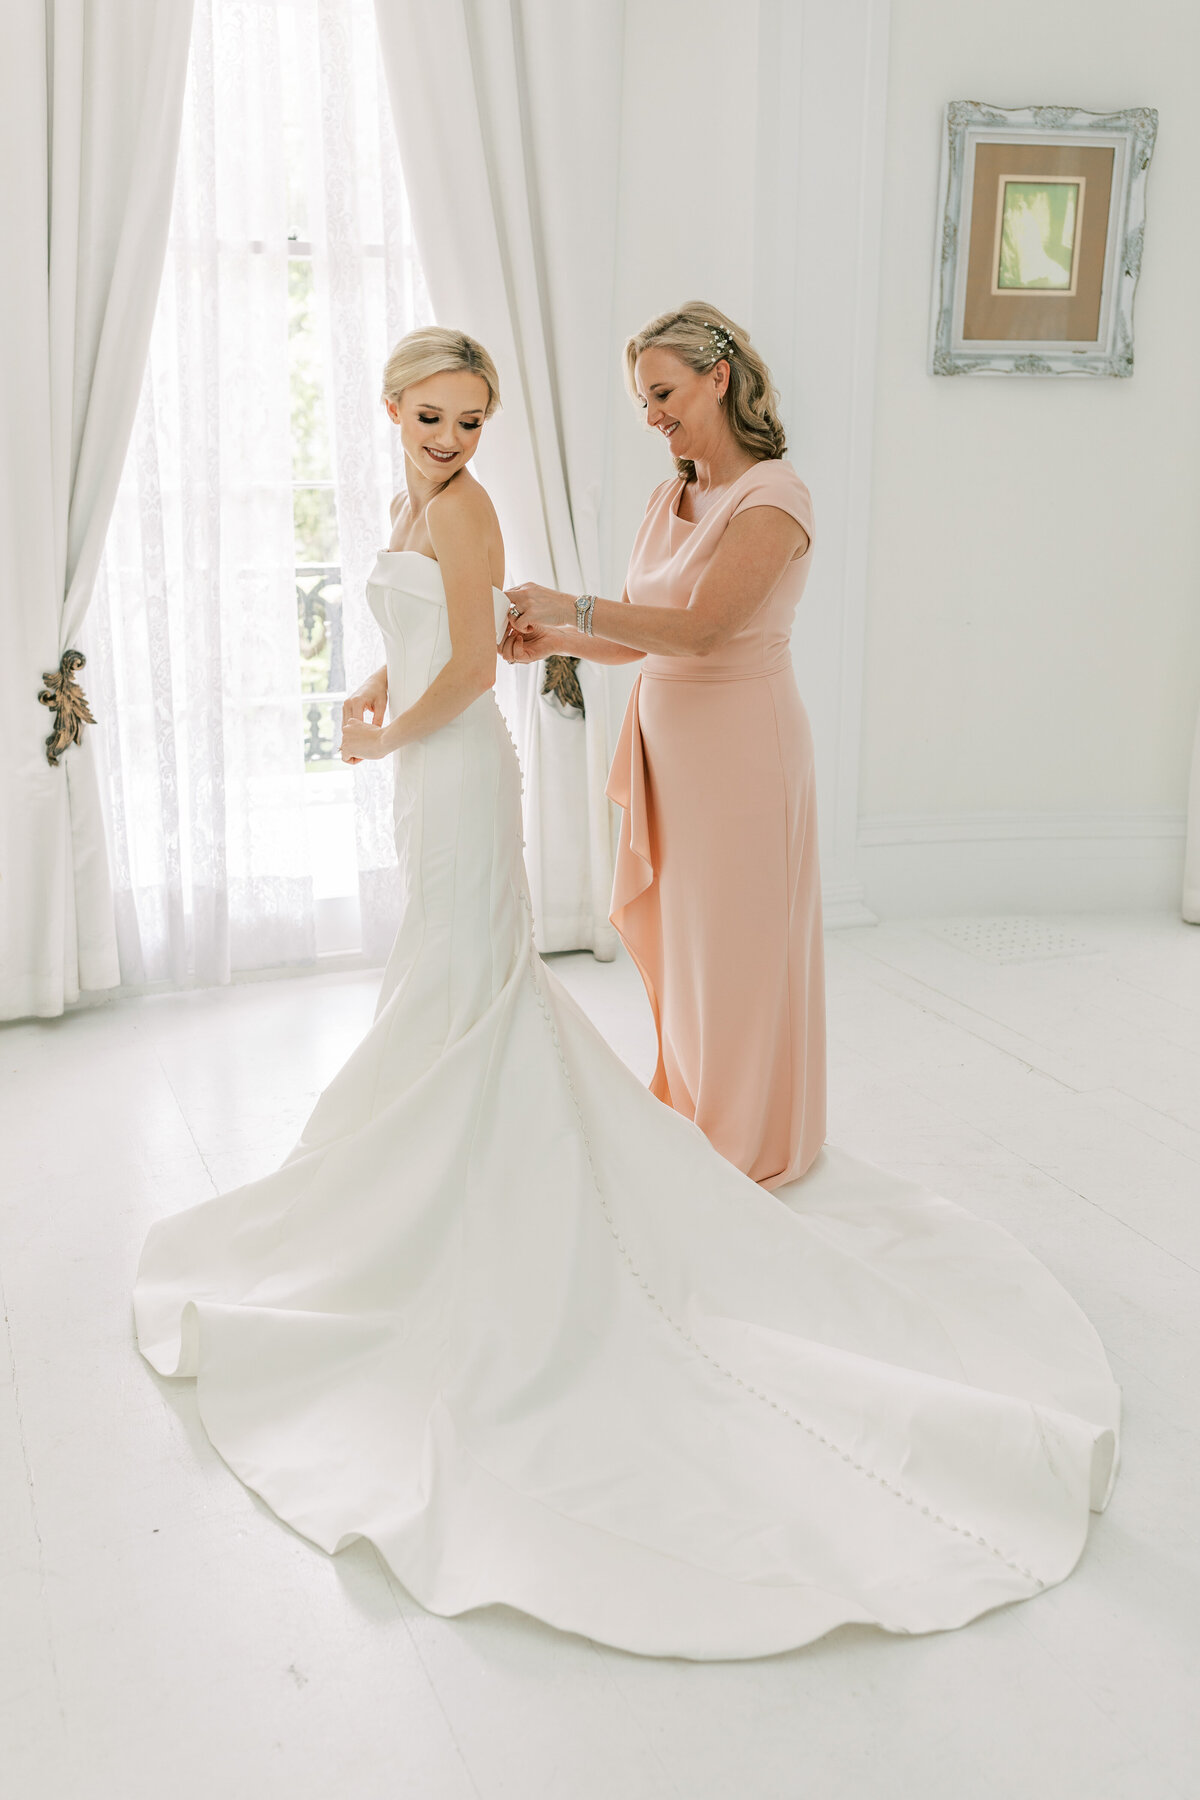 A mom zips the bride up in her dress in a white room.